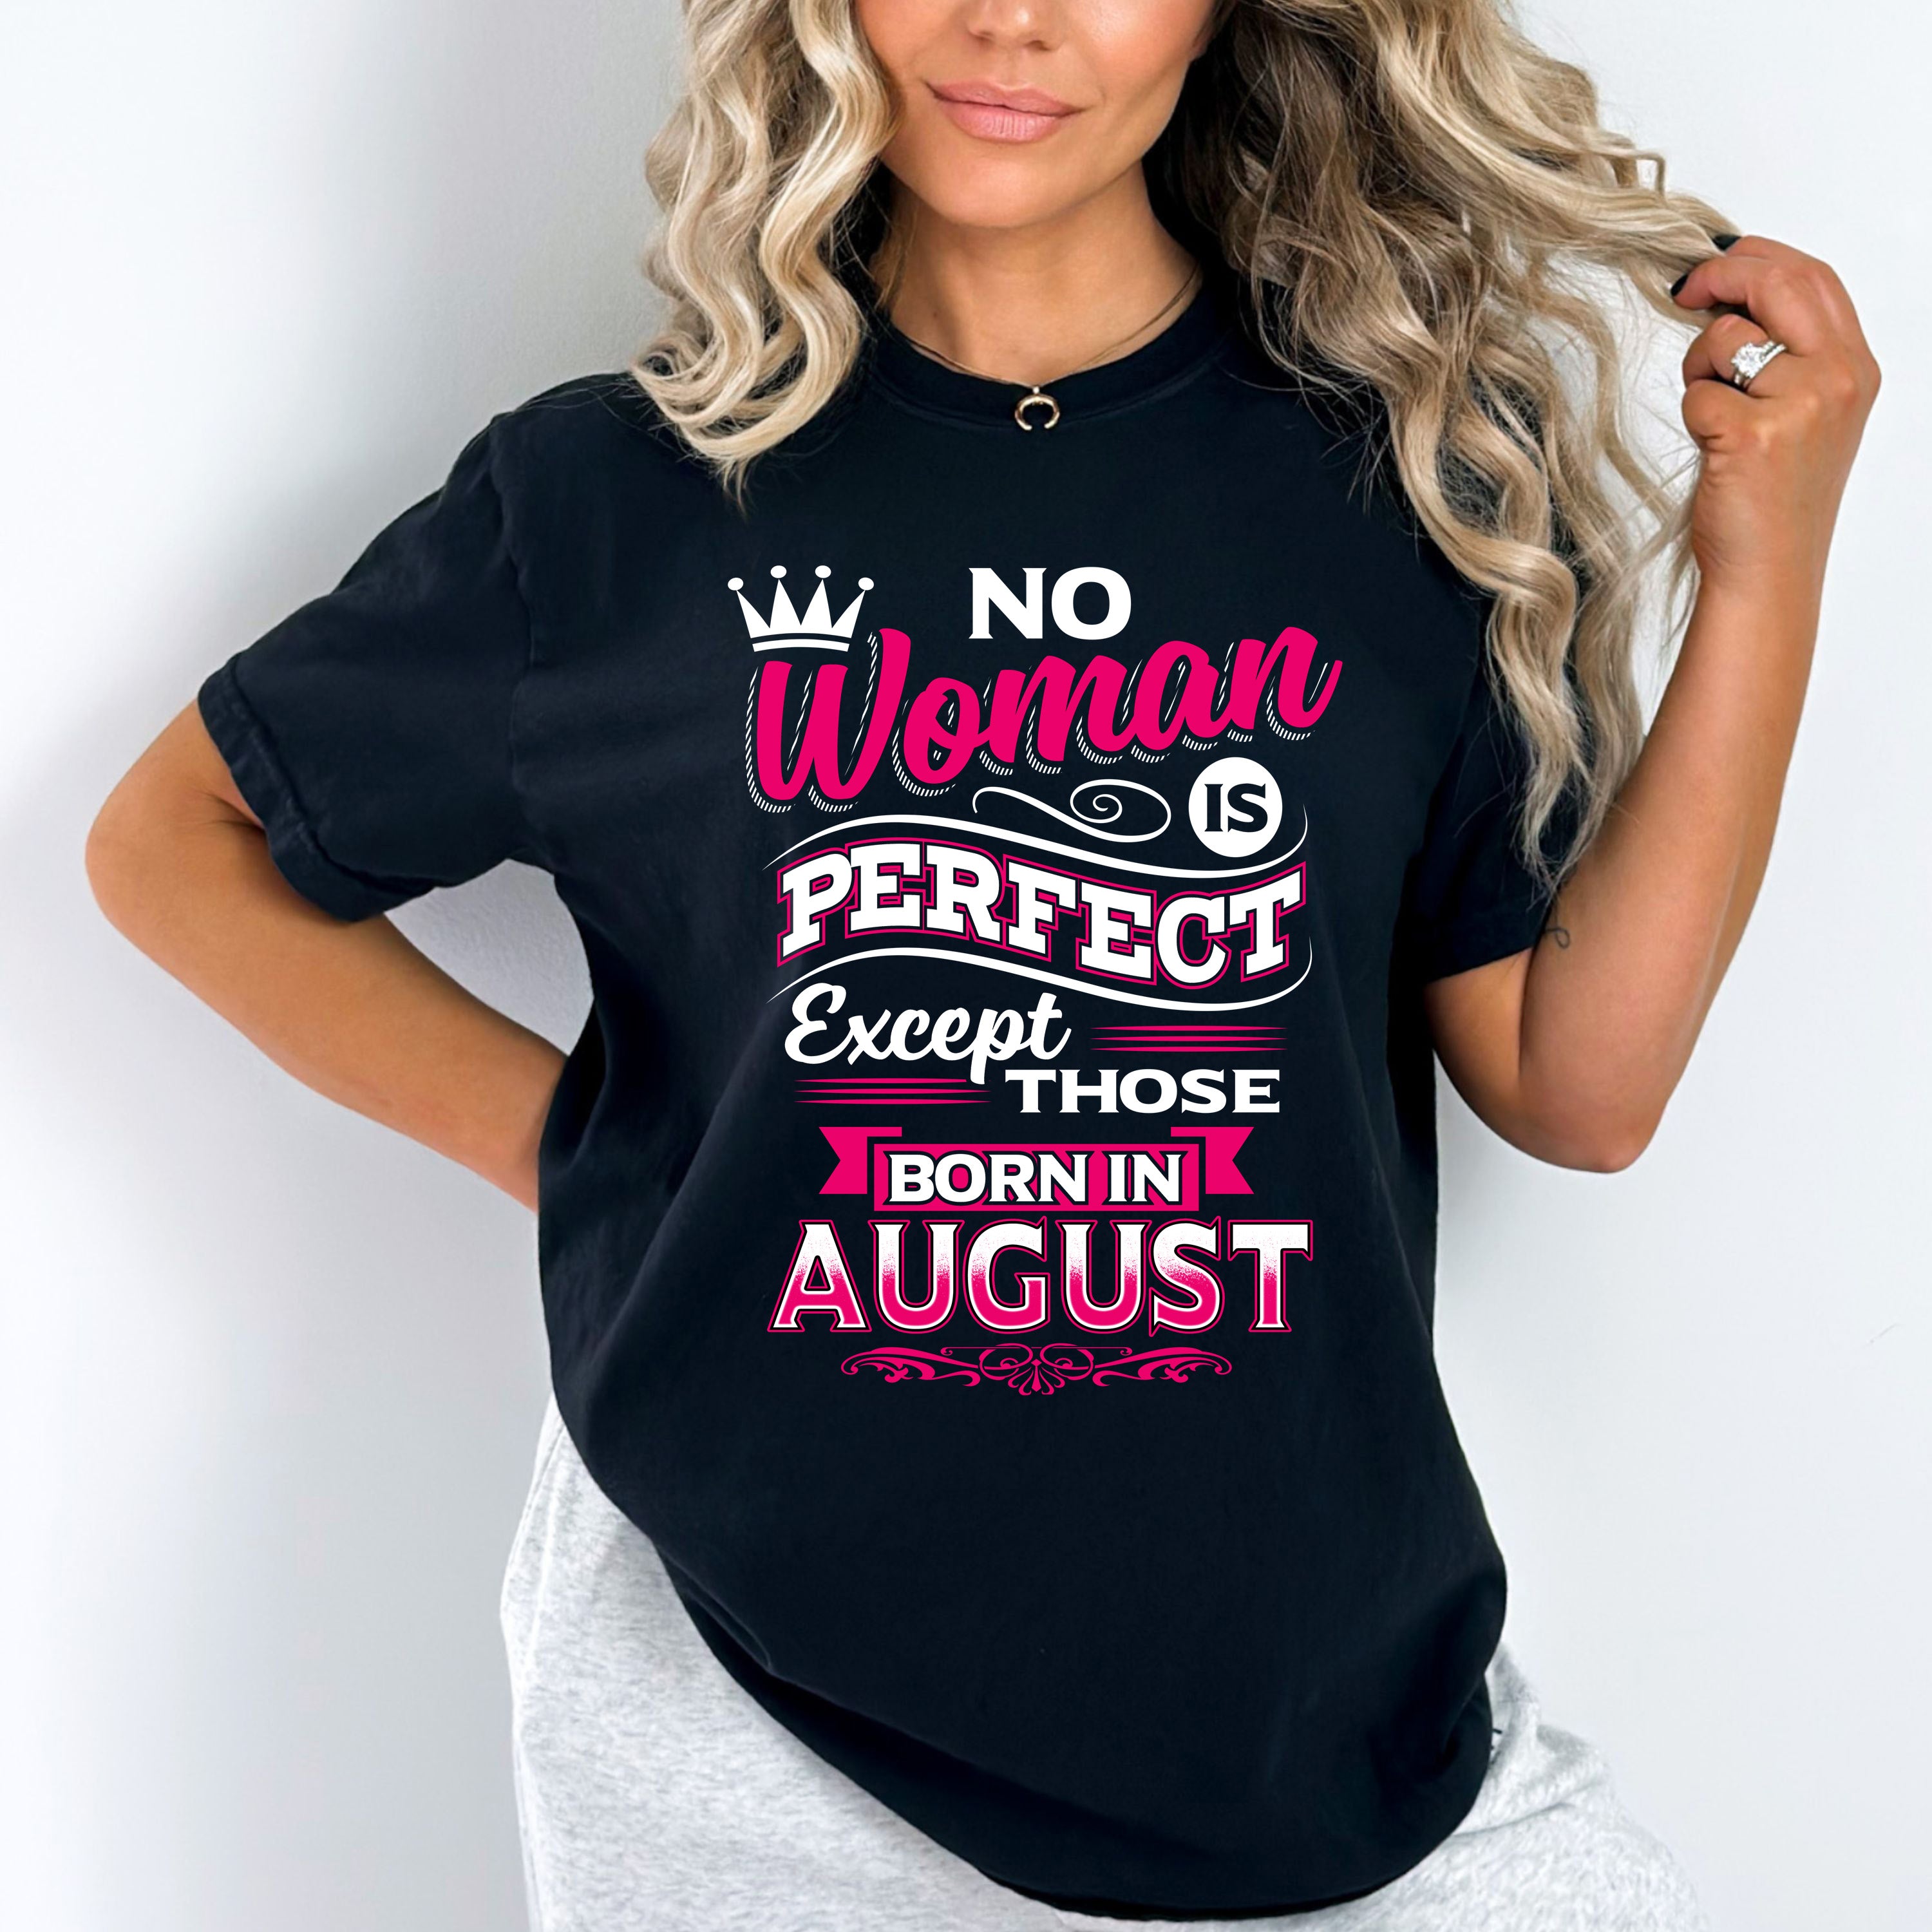 "No Woman Is Perfect Except Those Born In August"